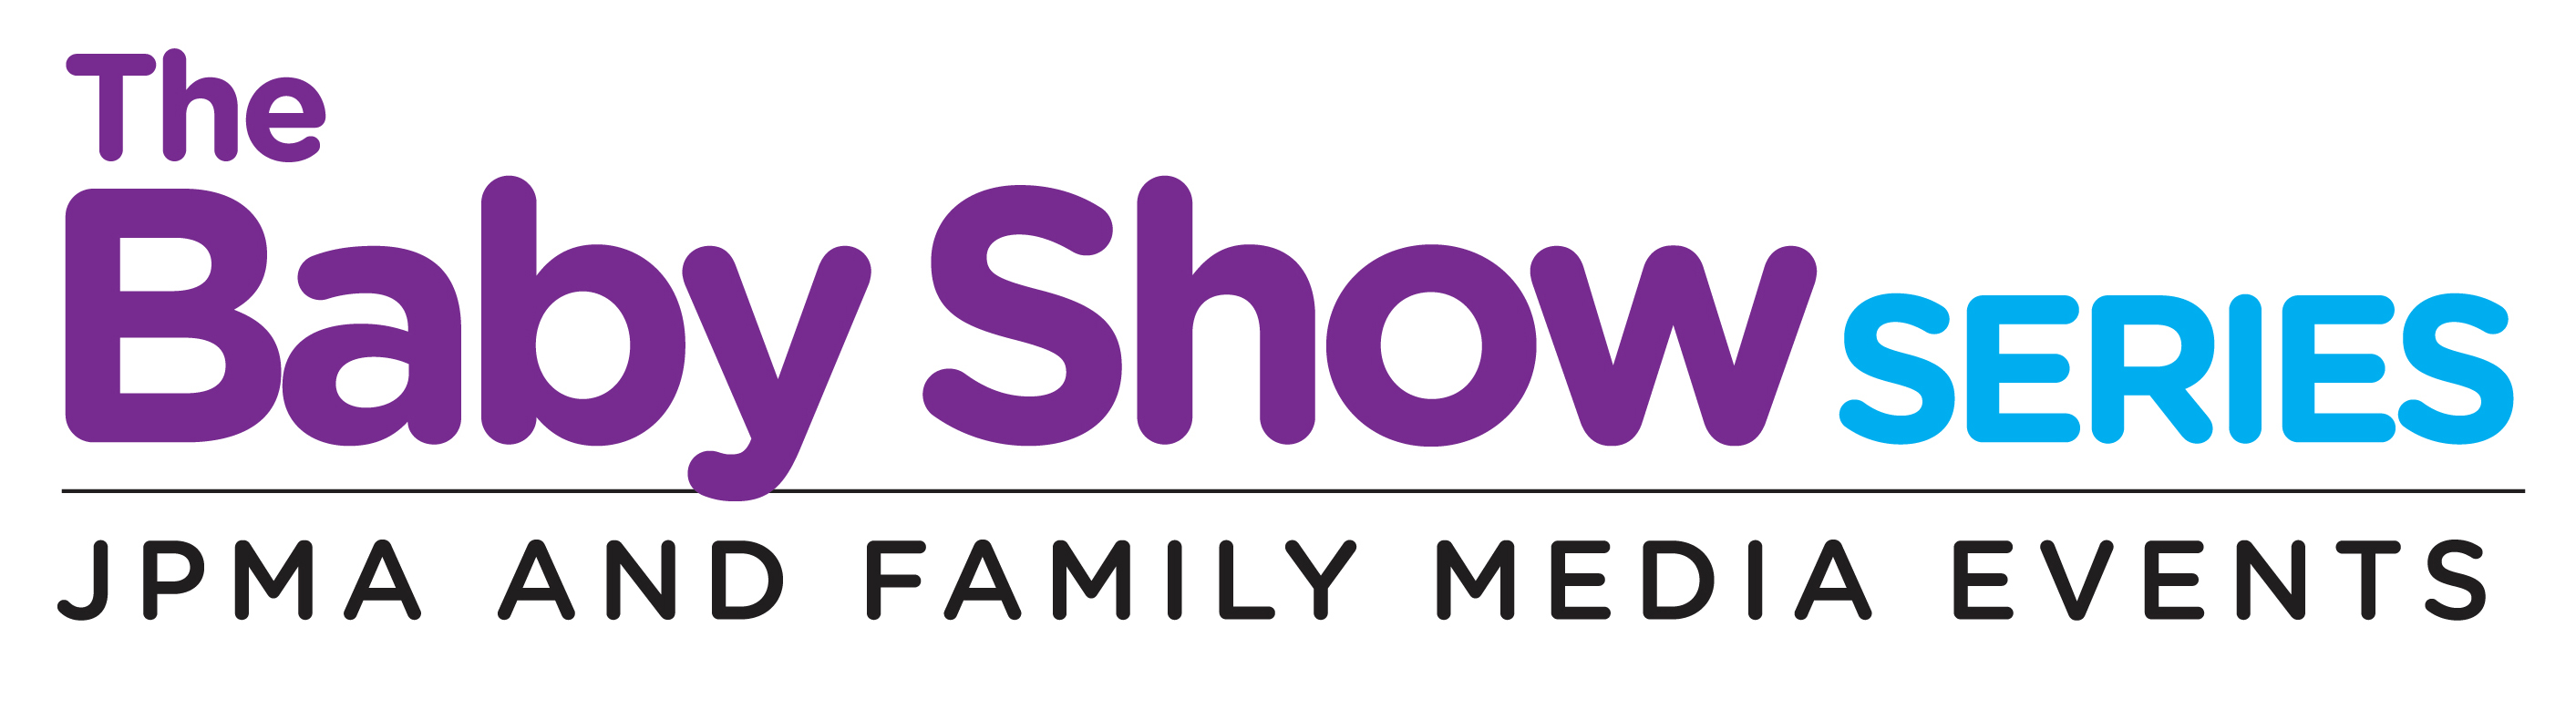 JPMA and Family Media Launch a Series of Baby Trade and Consumer Shows